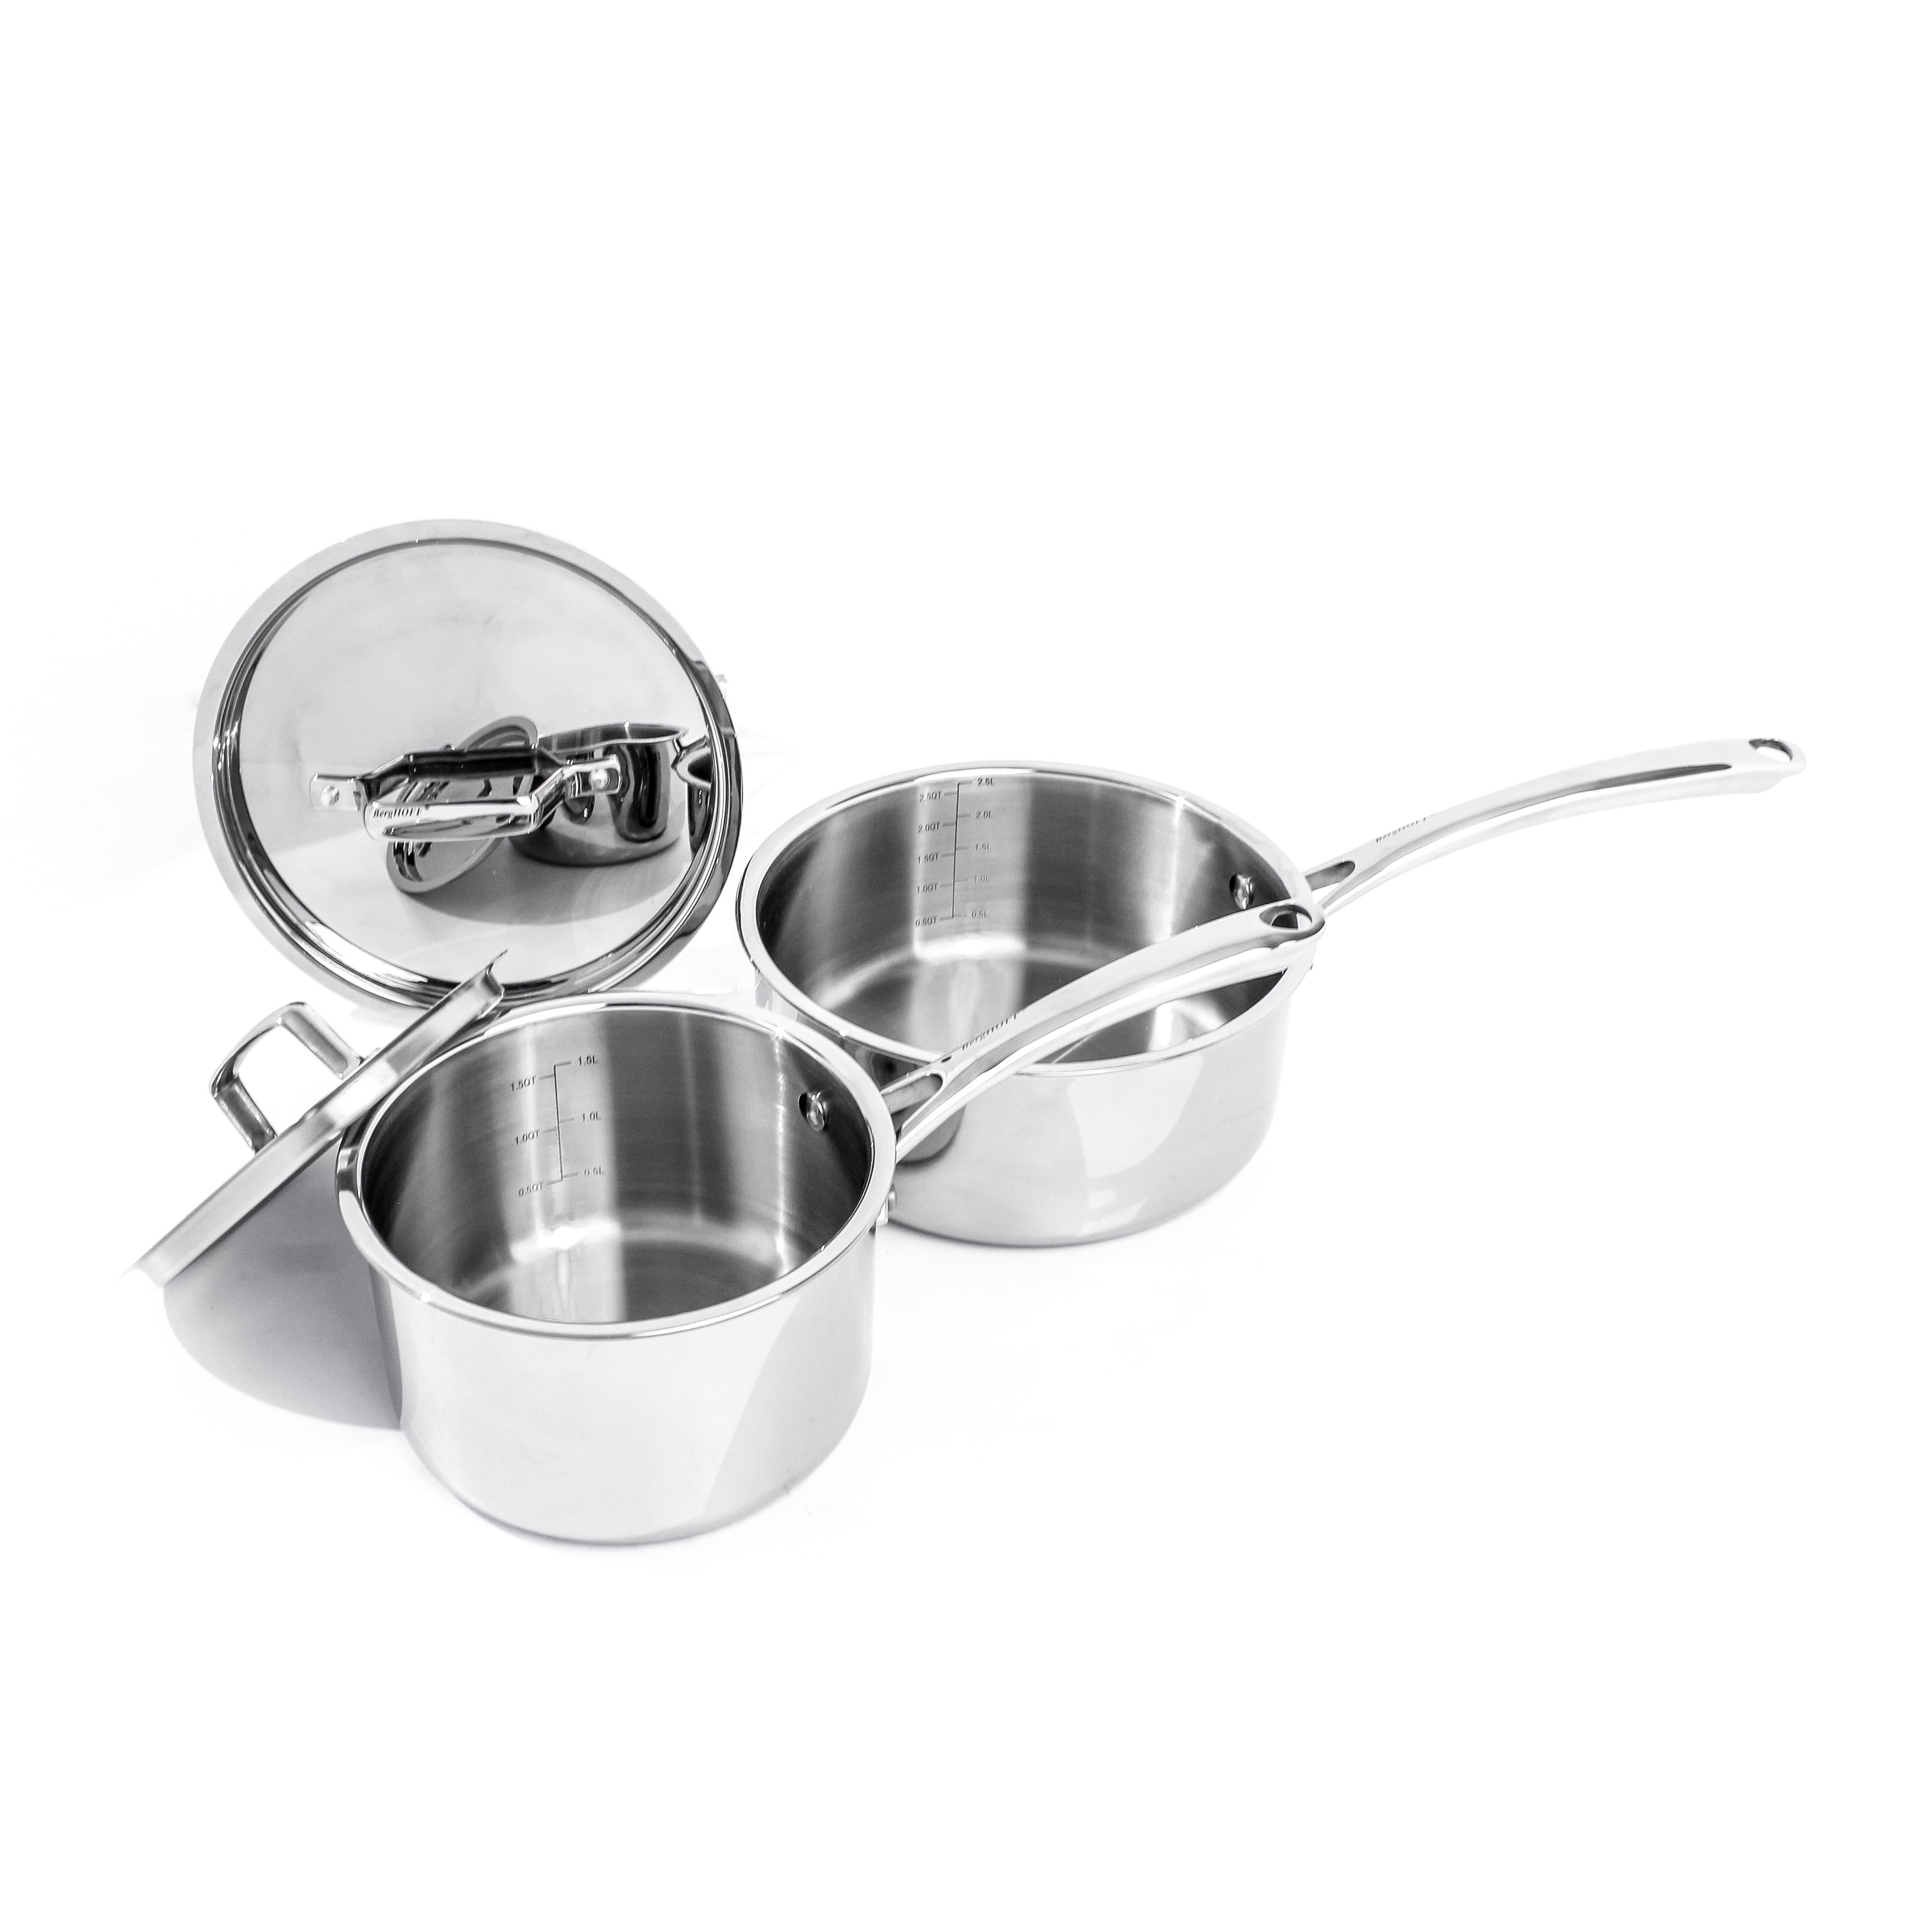 Nutrichef 2 qt Stainless Steel Triply Sauce Pot with Glass Lid